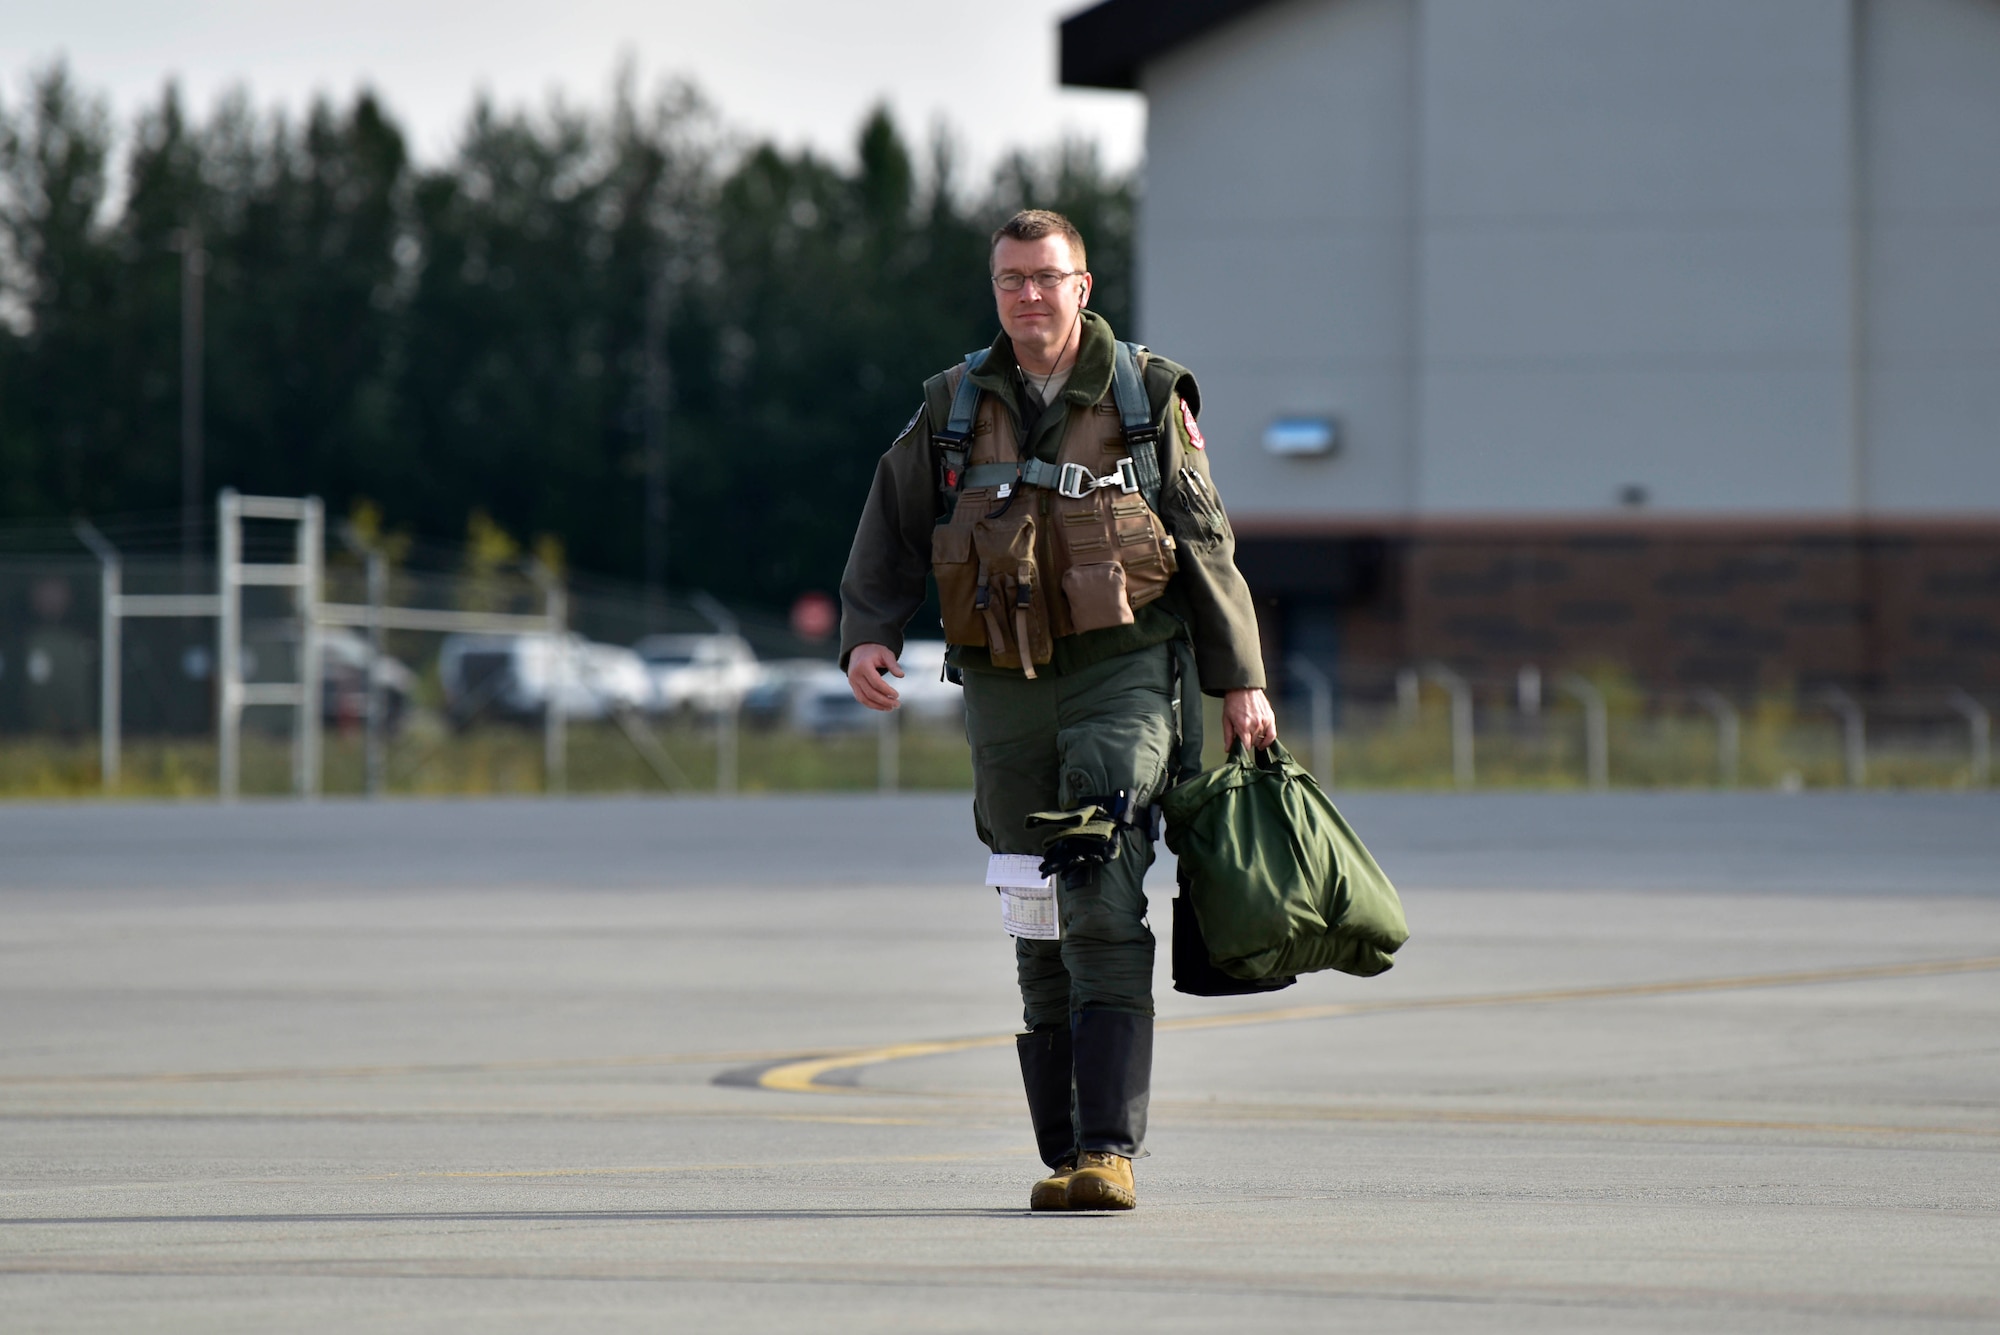 U.S. Air Force Col. Shawn E. Anger, the 354th Fighter Wing commander, steps to an F-16 Fighting Falcon assigned to the 18th Aggressor Squadron on Eielson Air Force Base, Alaska, Aug. 13, 2020. Anger assumed command of the wing in May 2020. (U.S. Air Force photo by Senior Airman Beaux Hebert)